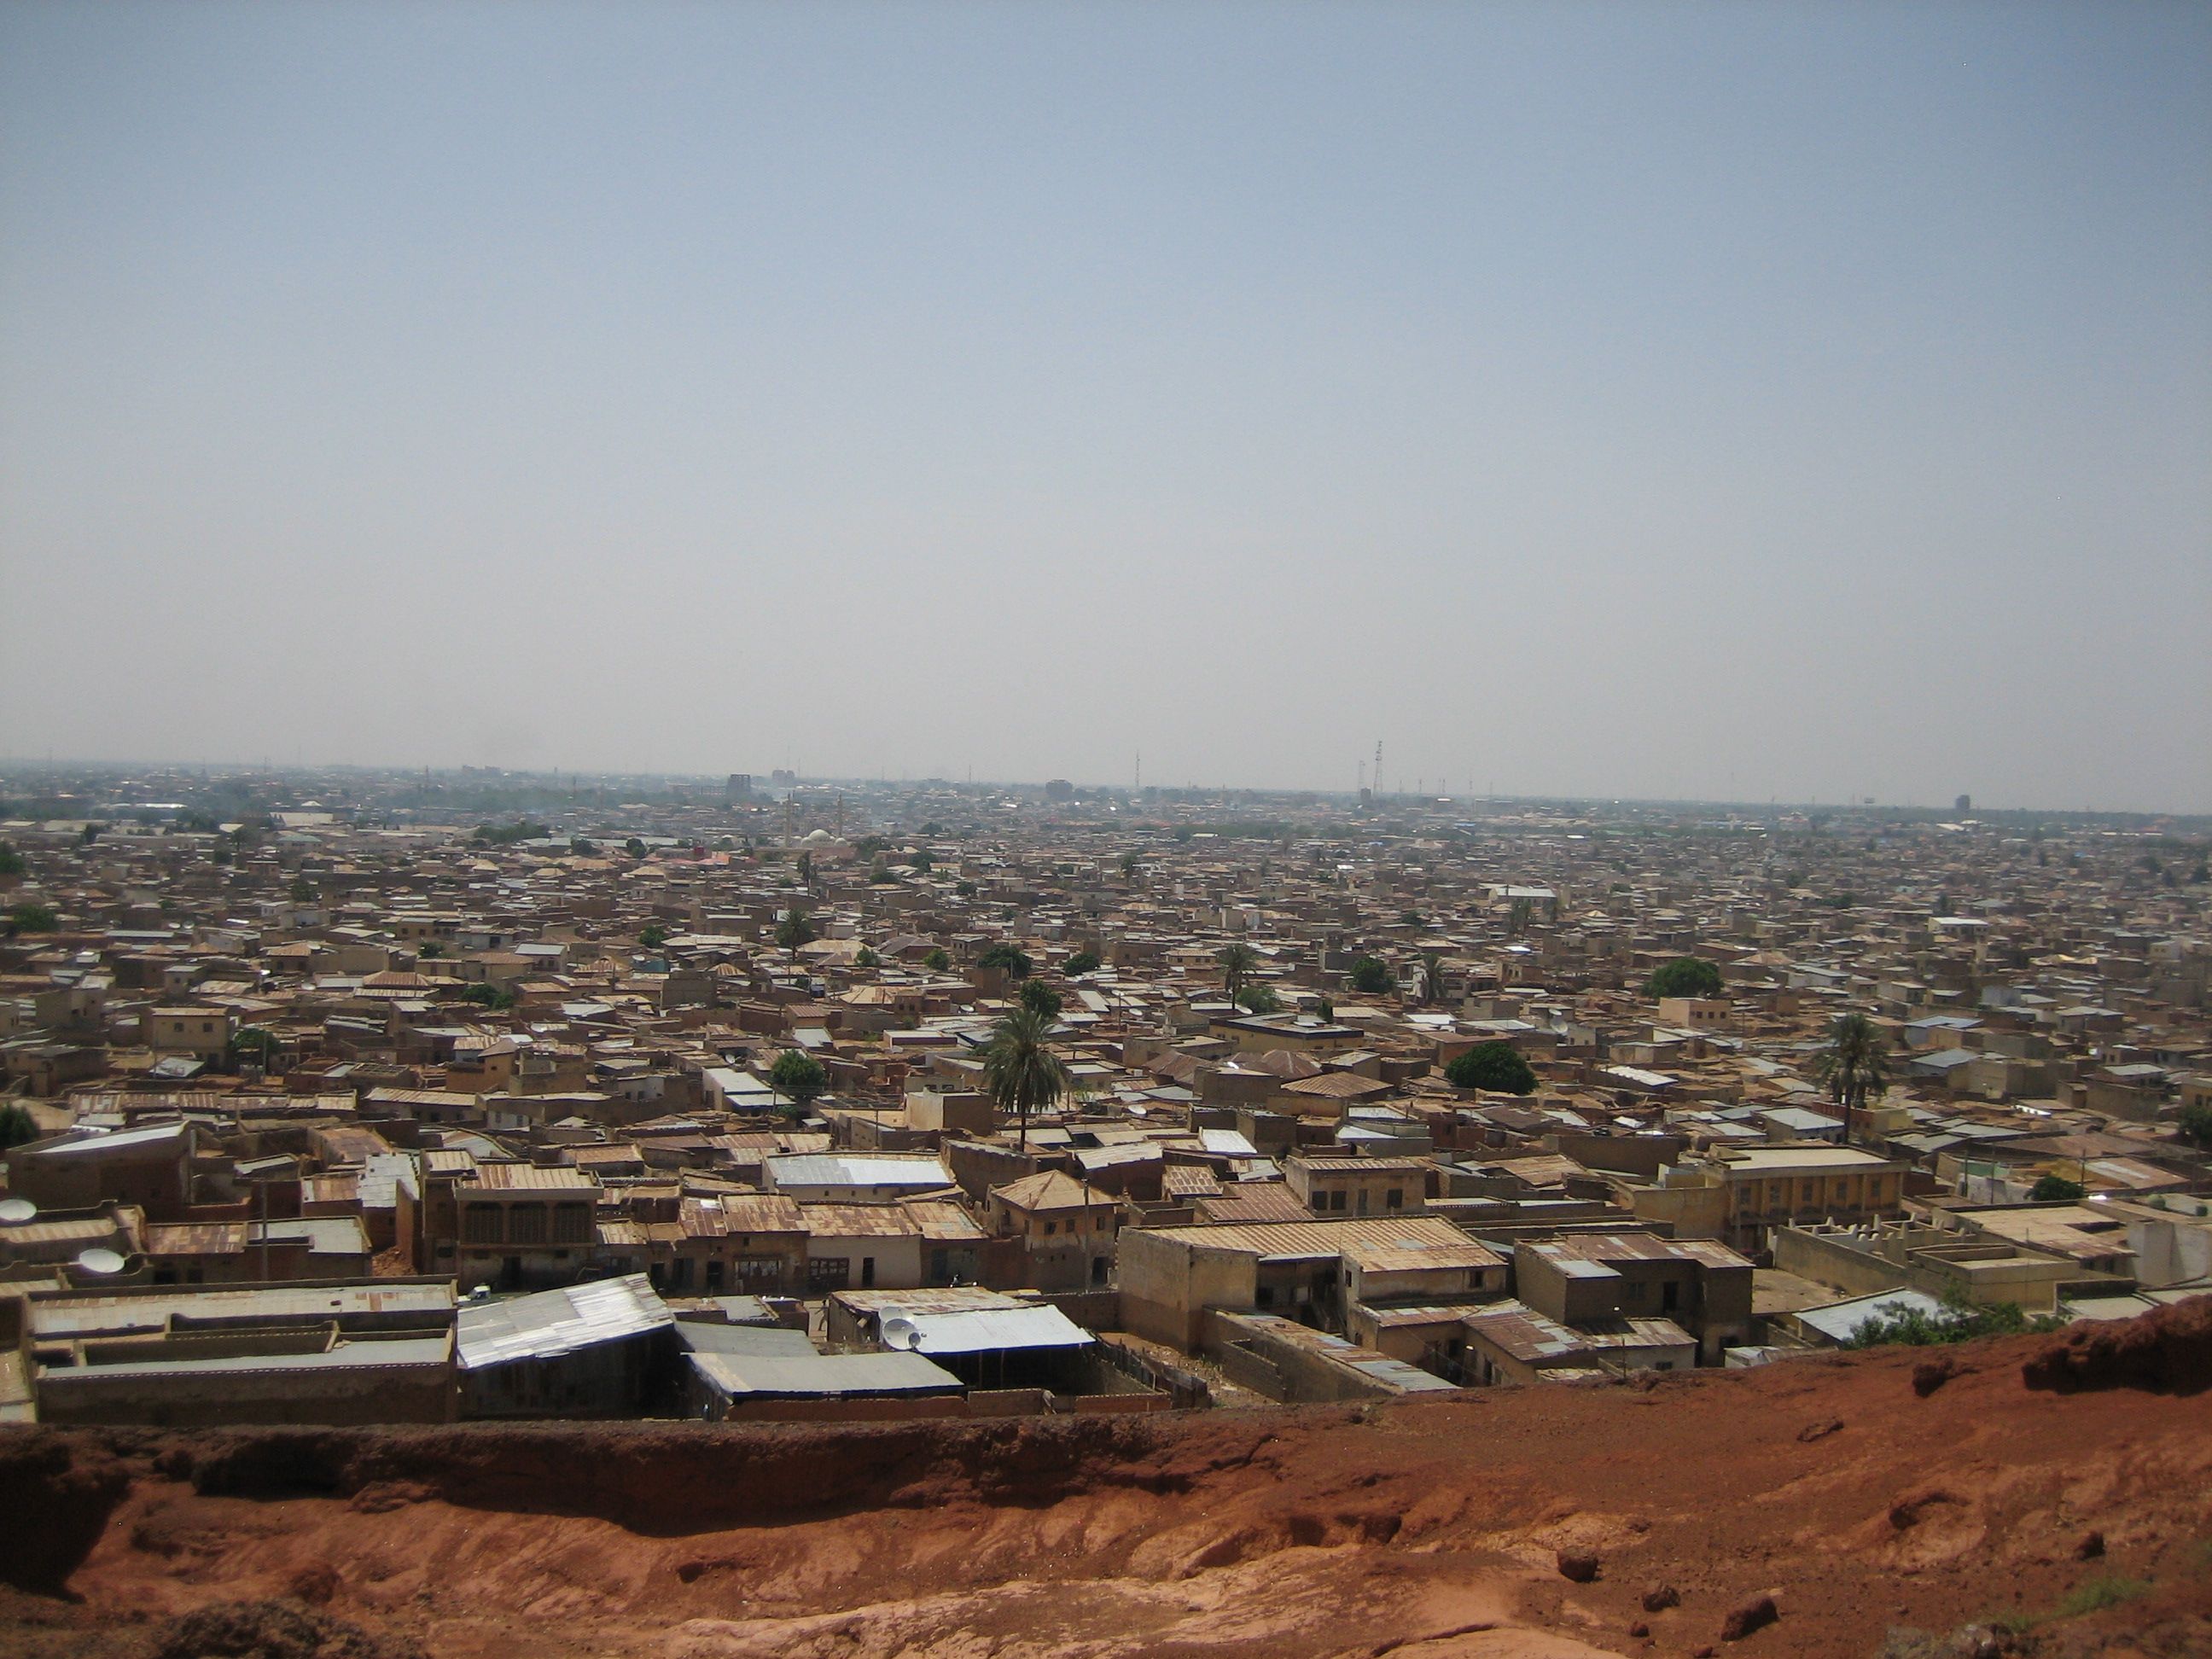 Kano as seen from Dalla Hill